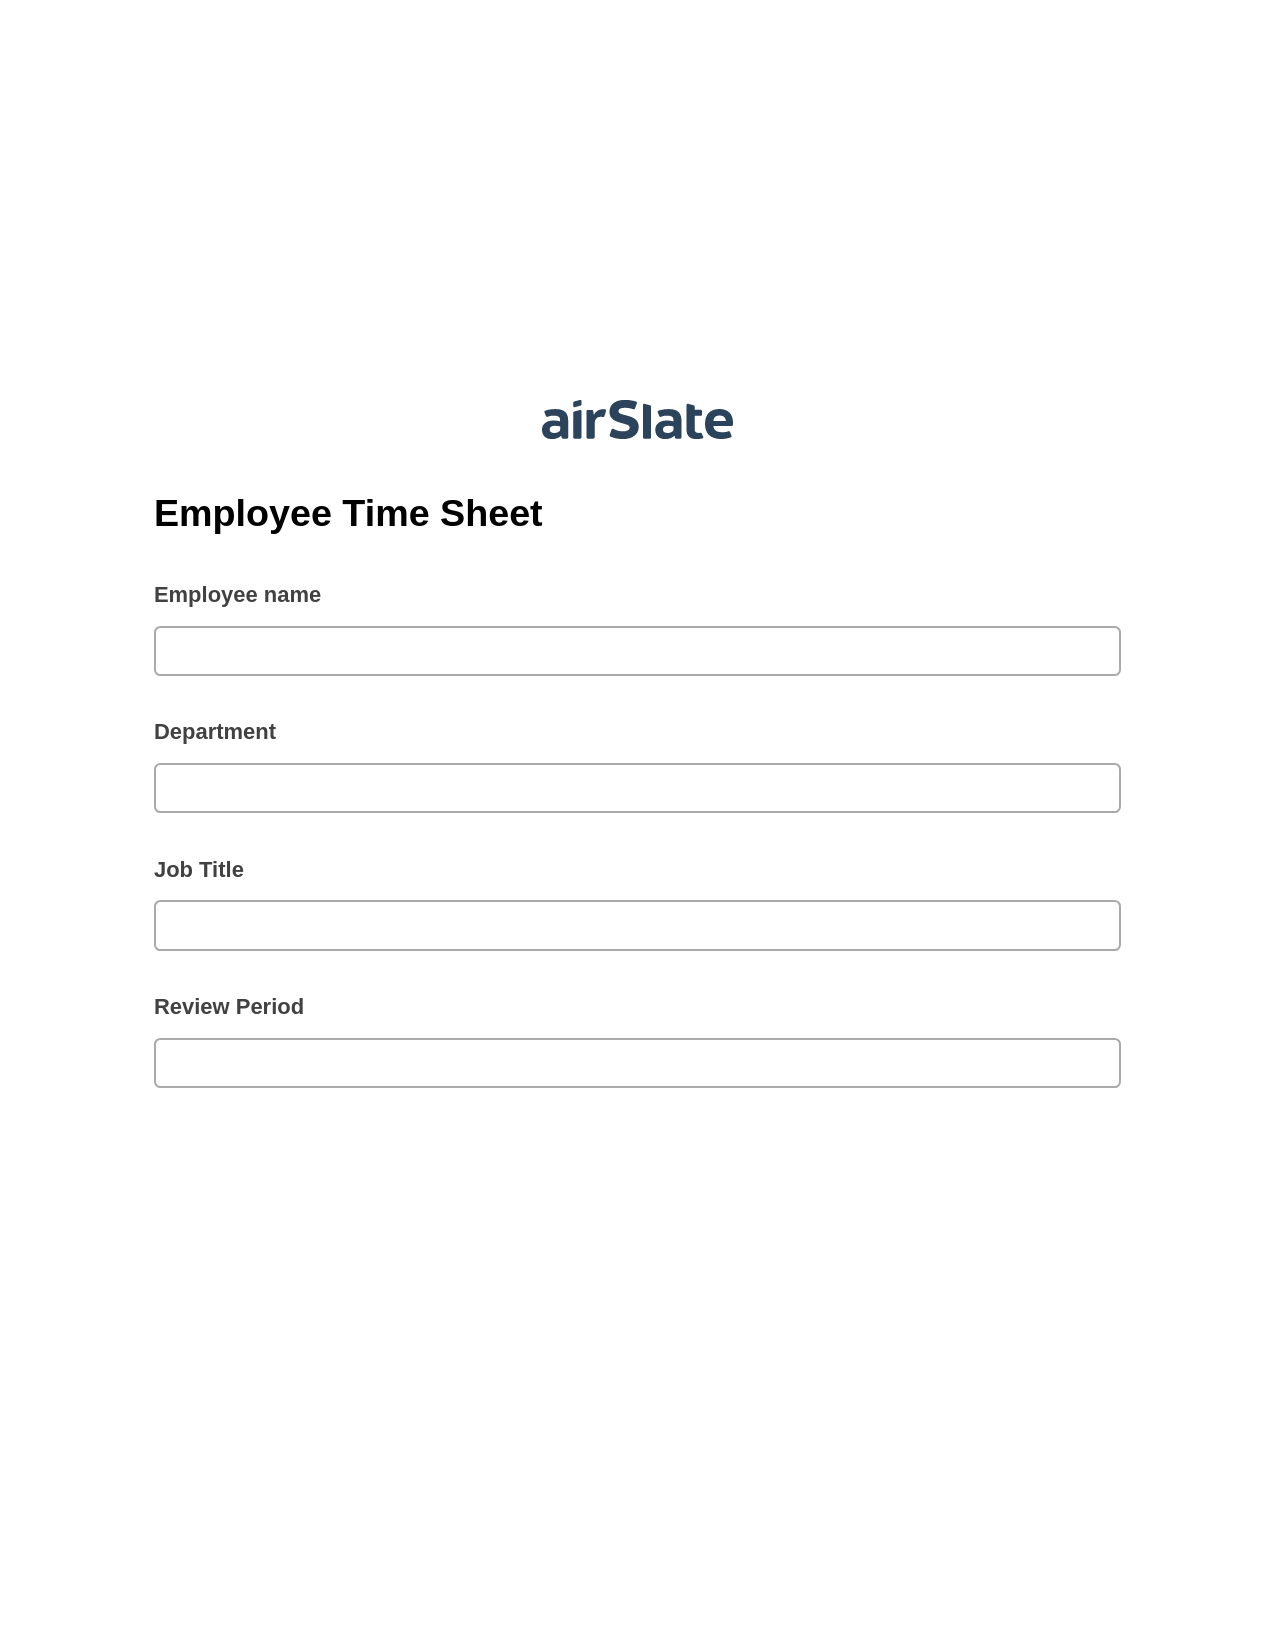 Employee Time Sheet Pre-fill from Litmos bot, Update Audit Trail Bot, Archive to Dropbox Bot